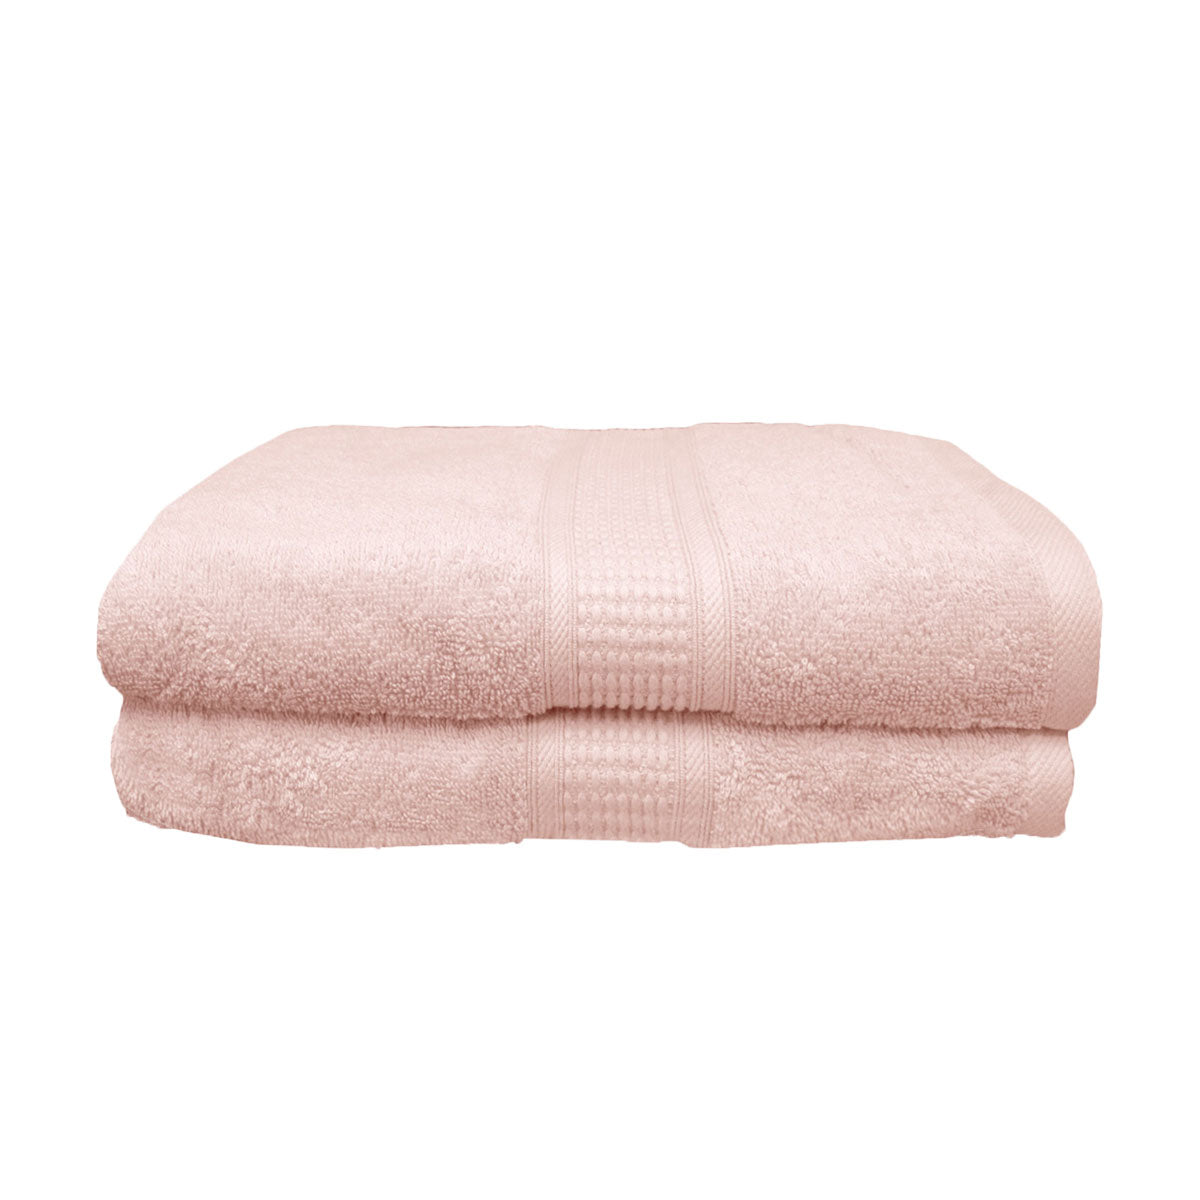 Coral Combed Cotton Bath Sheets - set of 2